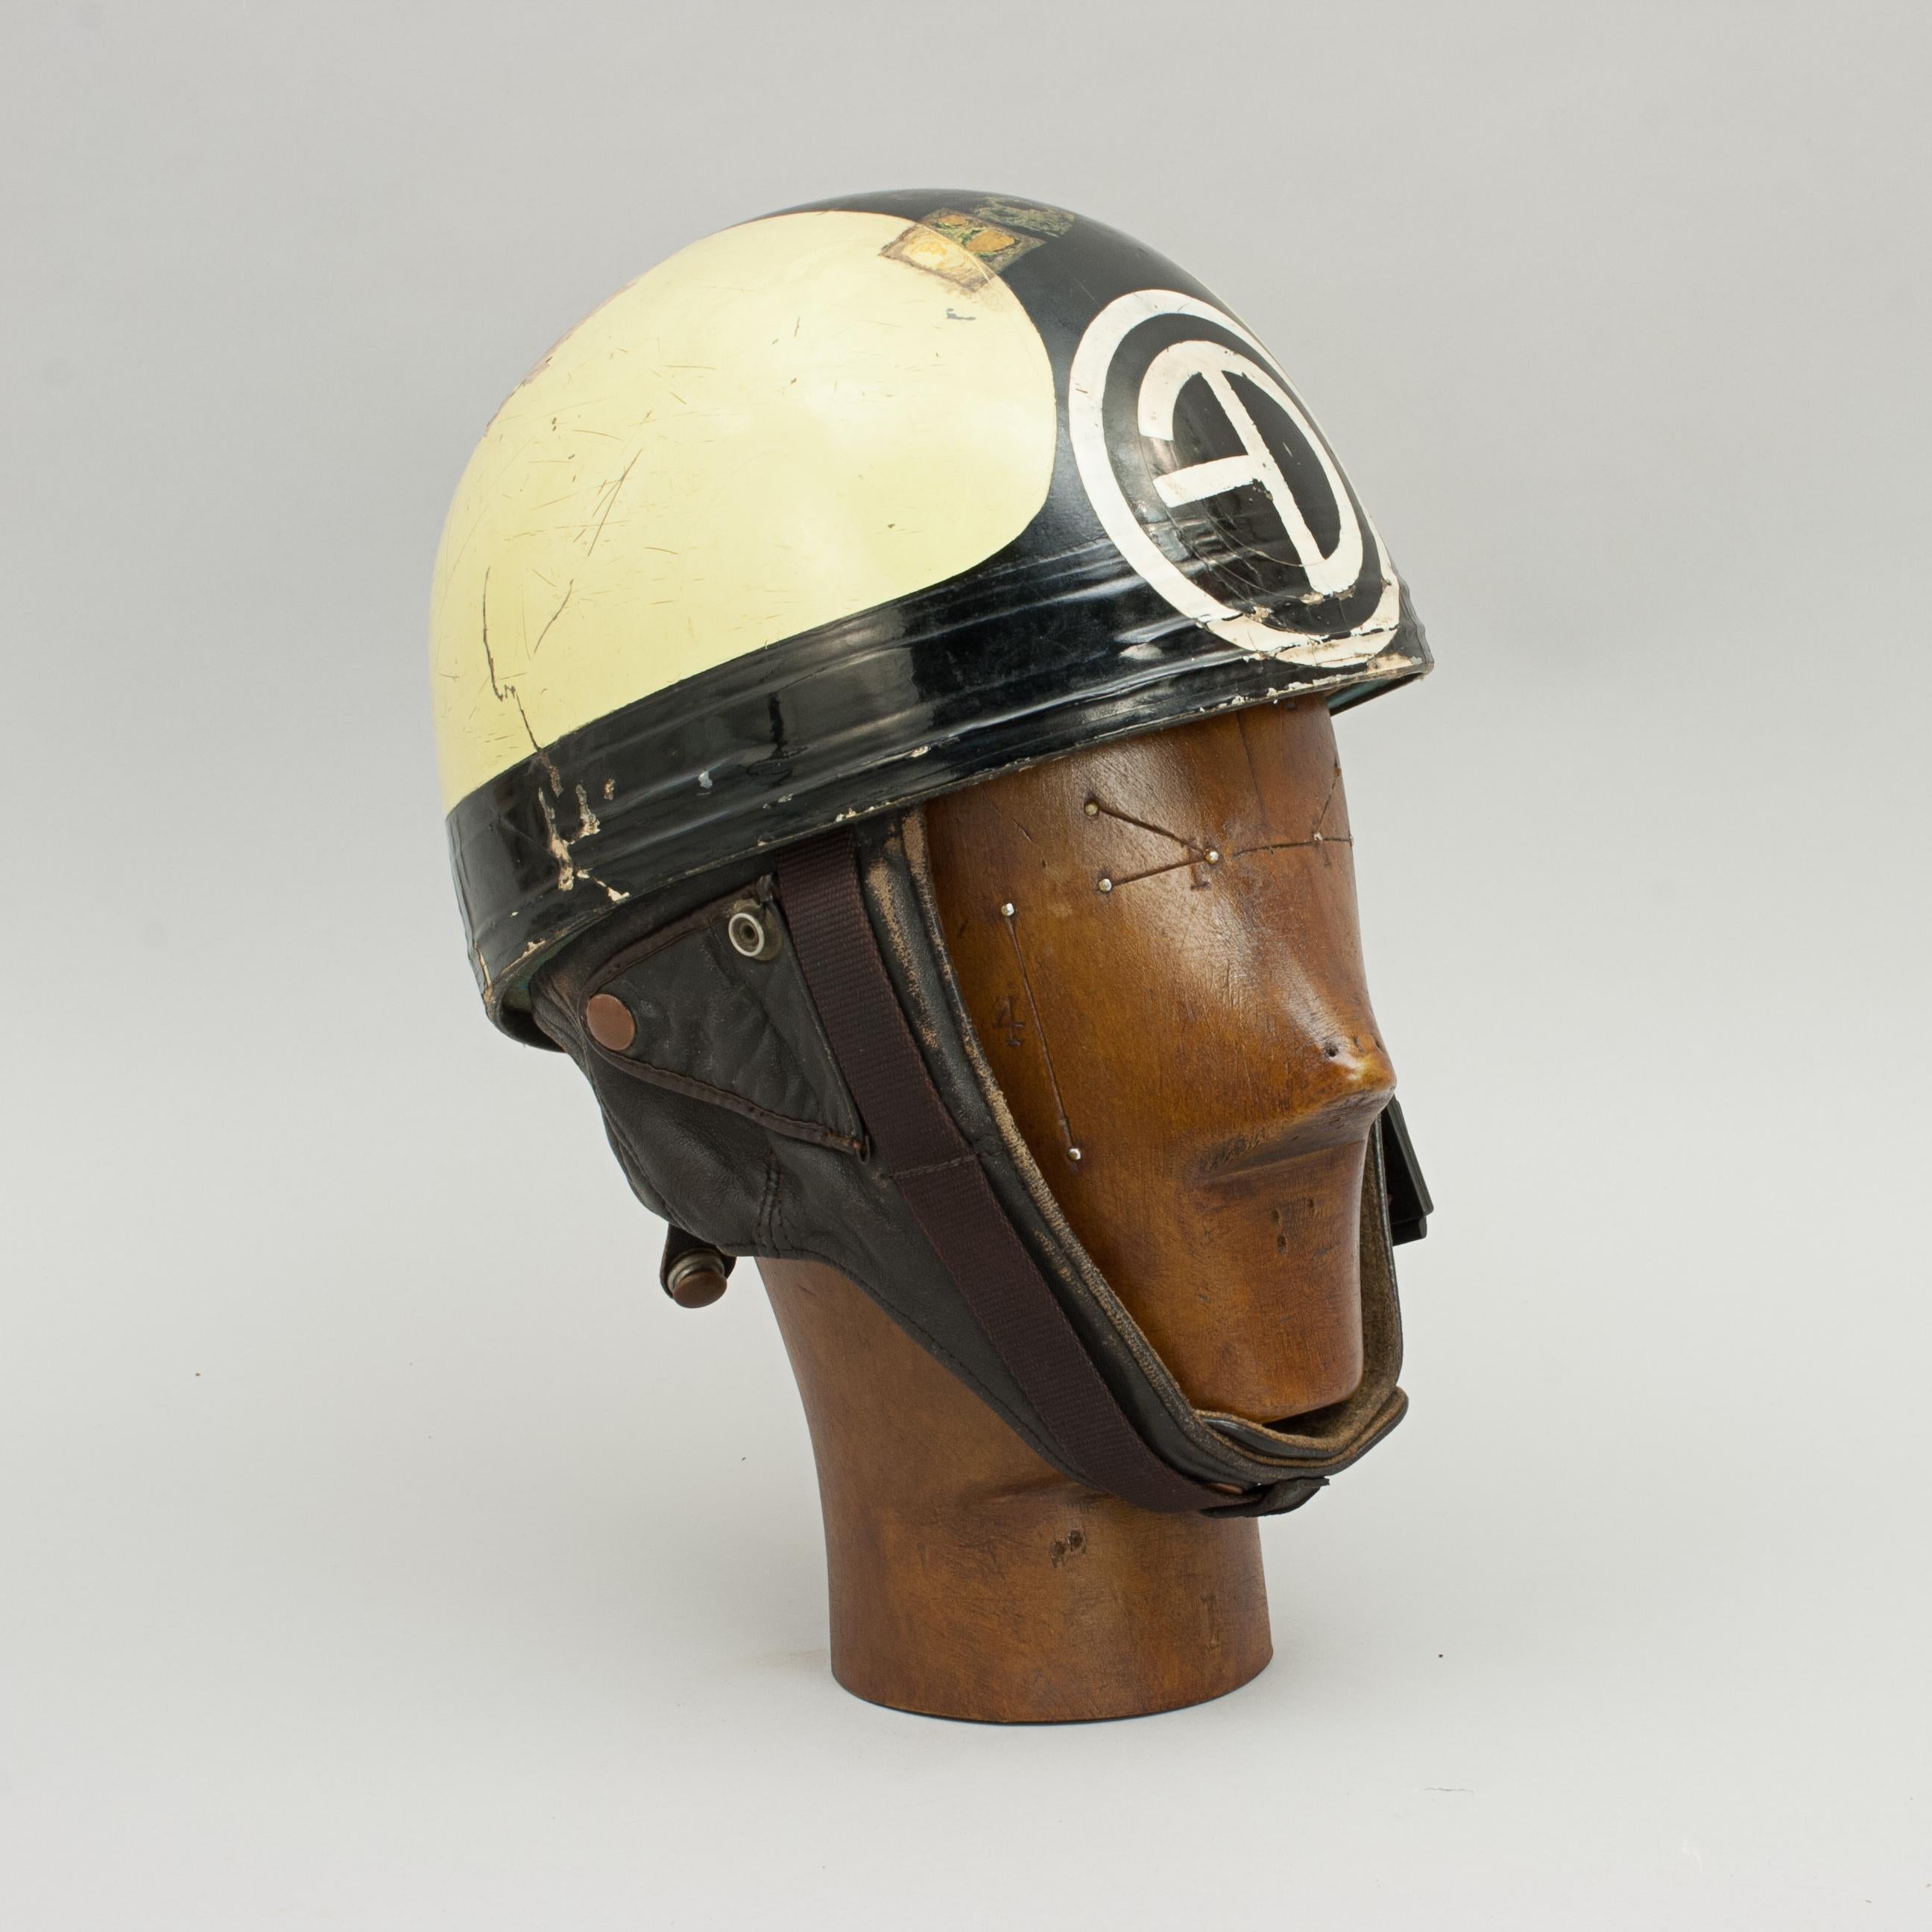 Vintage racing Cromwell crash helmet.
A Manx Grand Prix Motorcycle helmet made in England by Cromwell. This is an ACU approved racing helmet with a Manx Grand Prix scrutineers label on the side, suggesting that it has most probably been used to